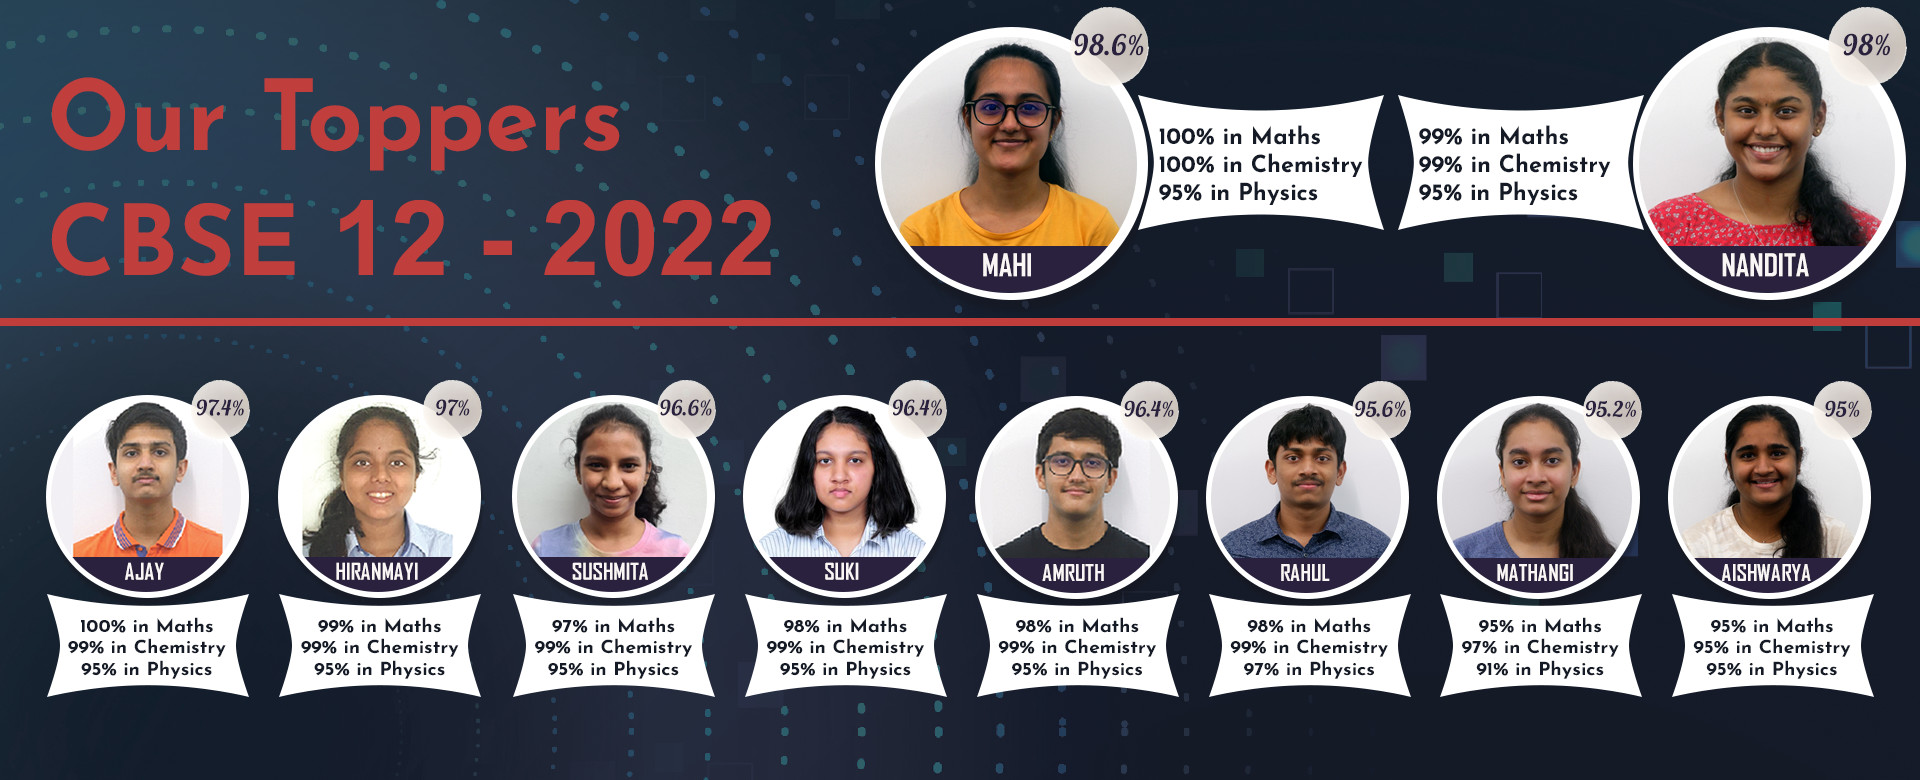 Our CBSE 12 Toppers 2022